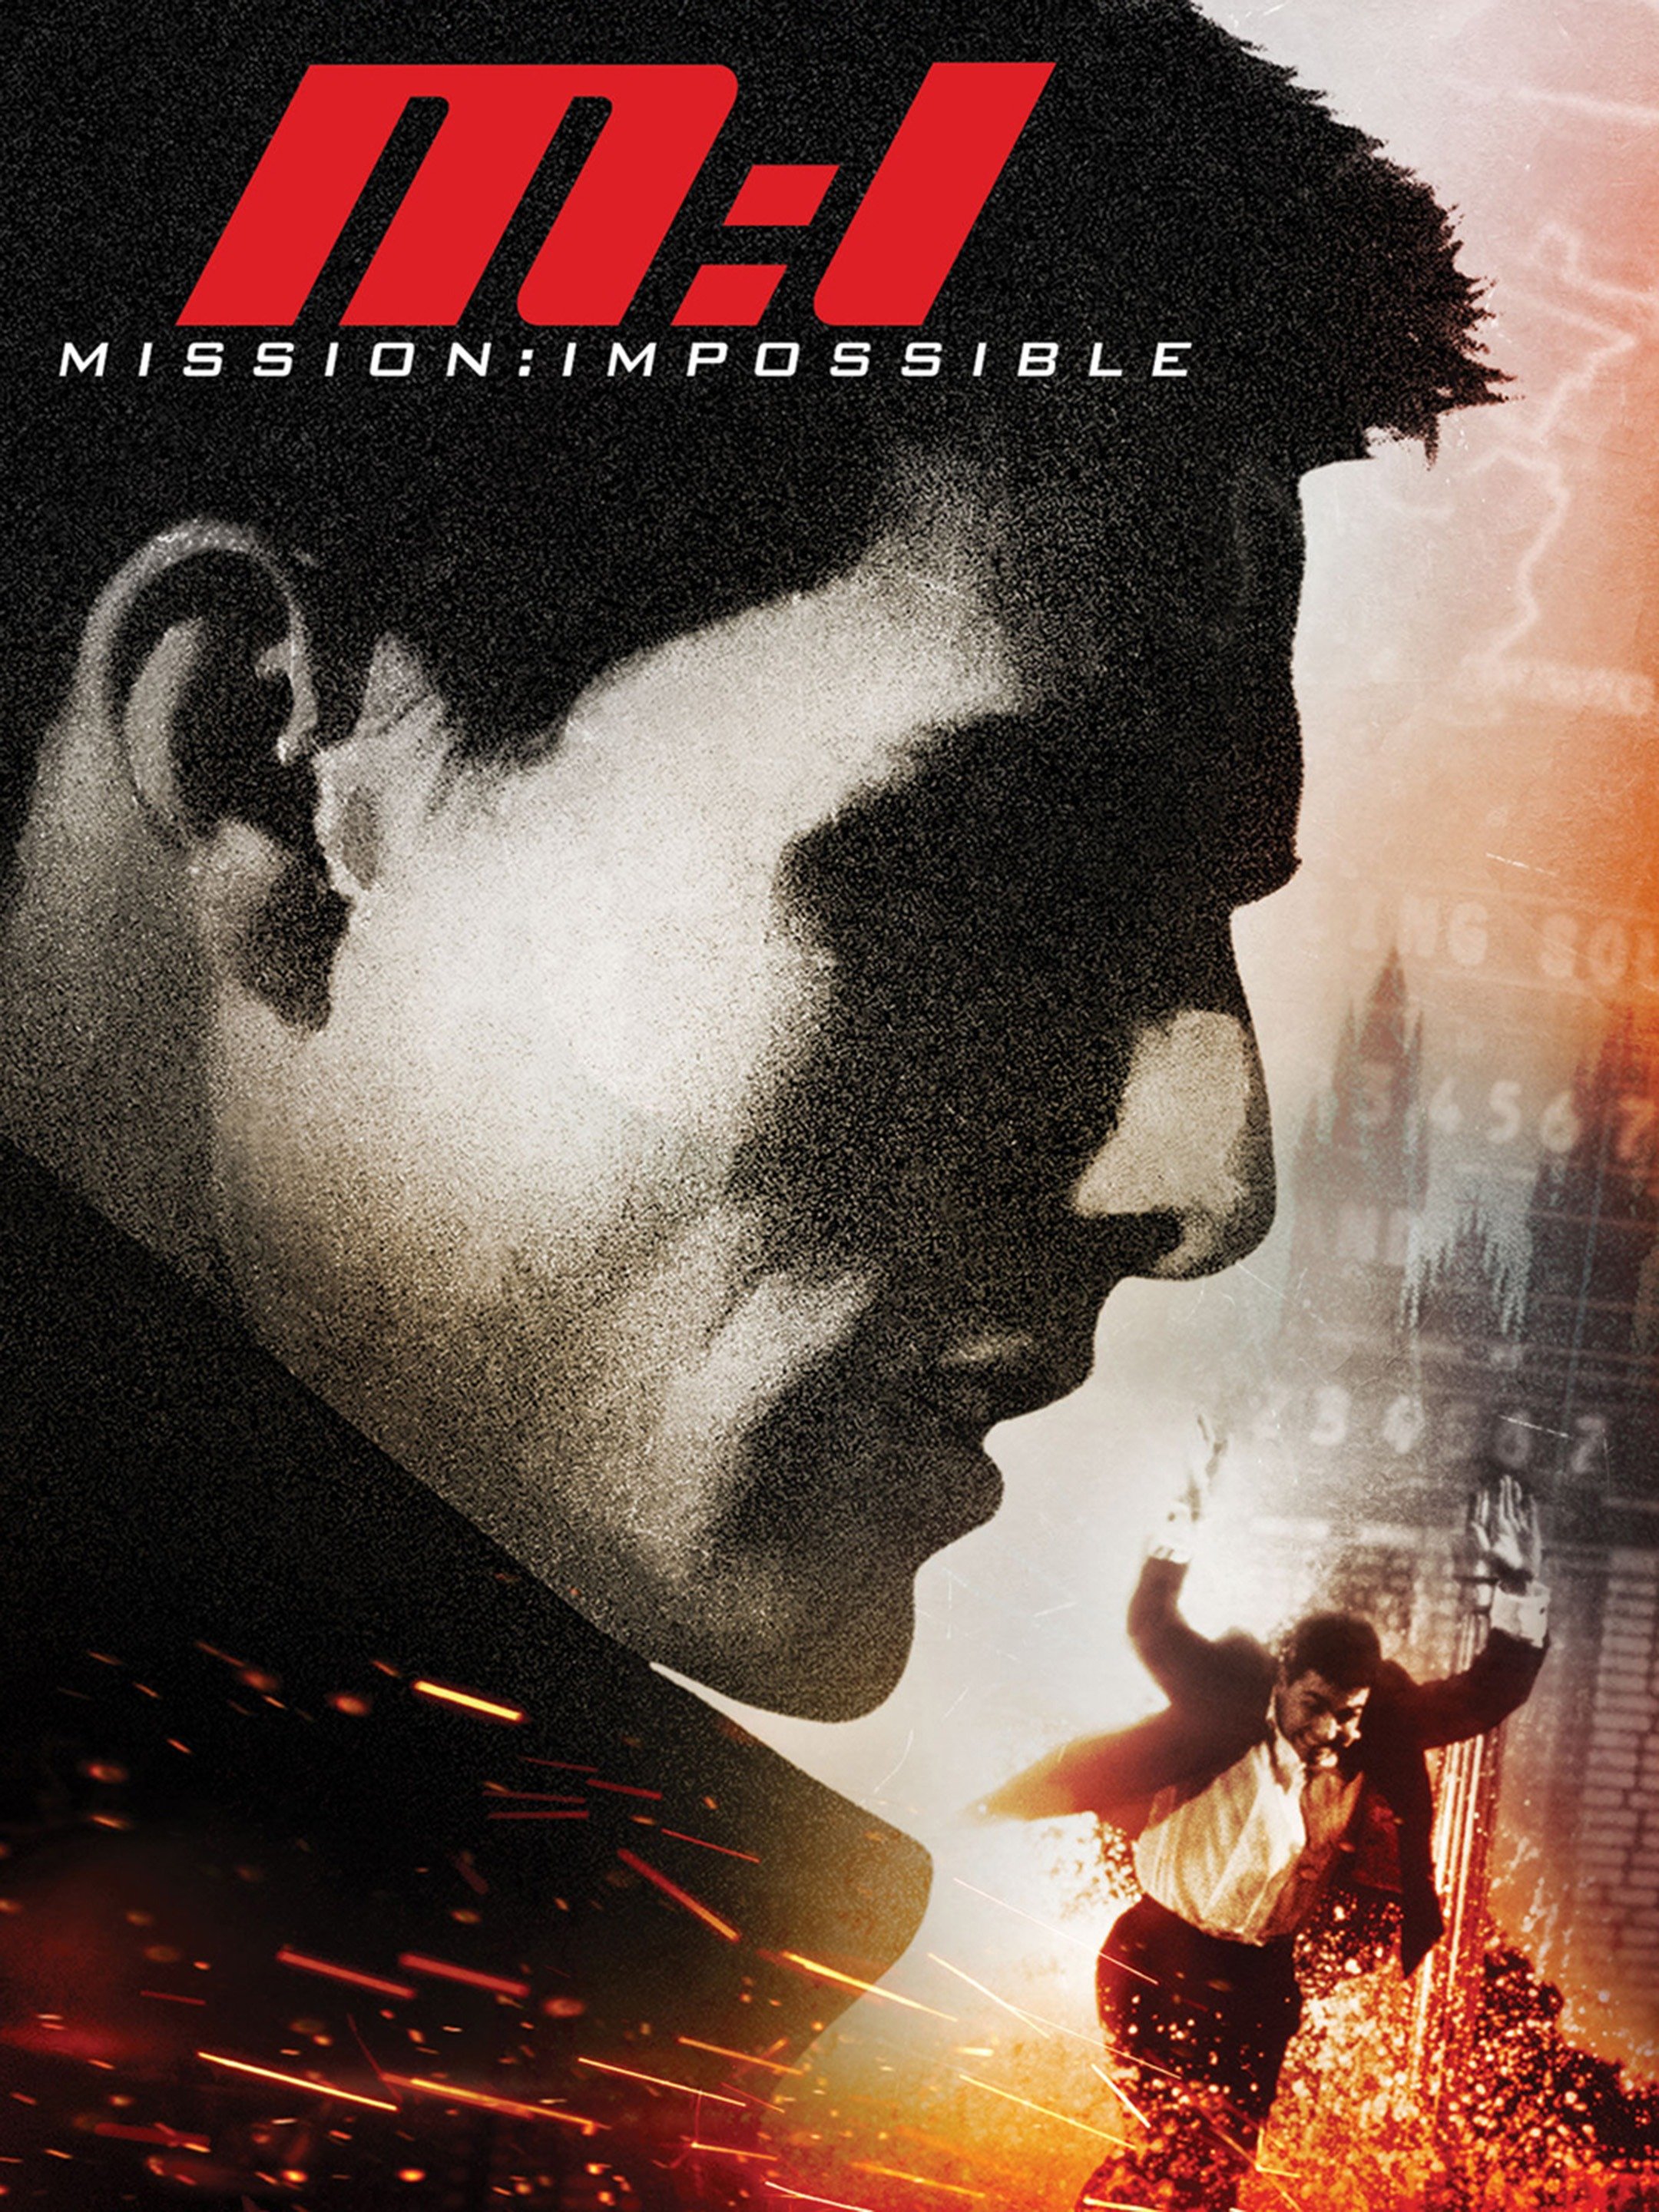 mission impossible 4 ghost protocol hindi dubbed torrent download